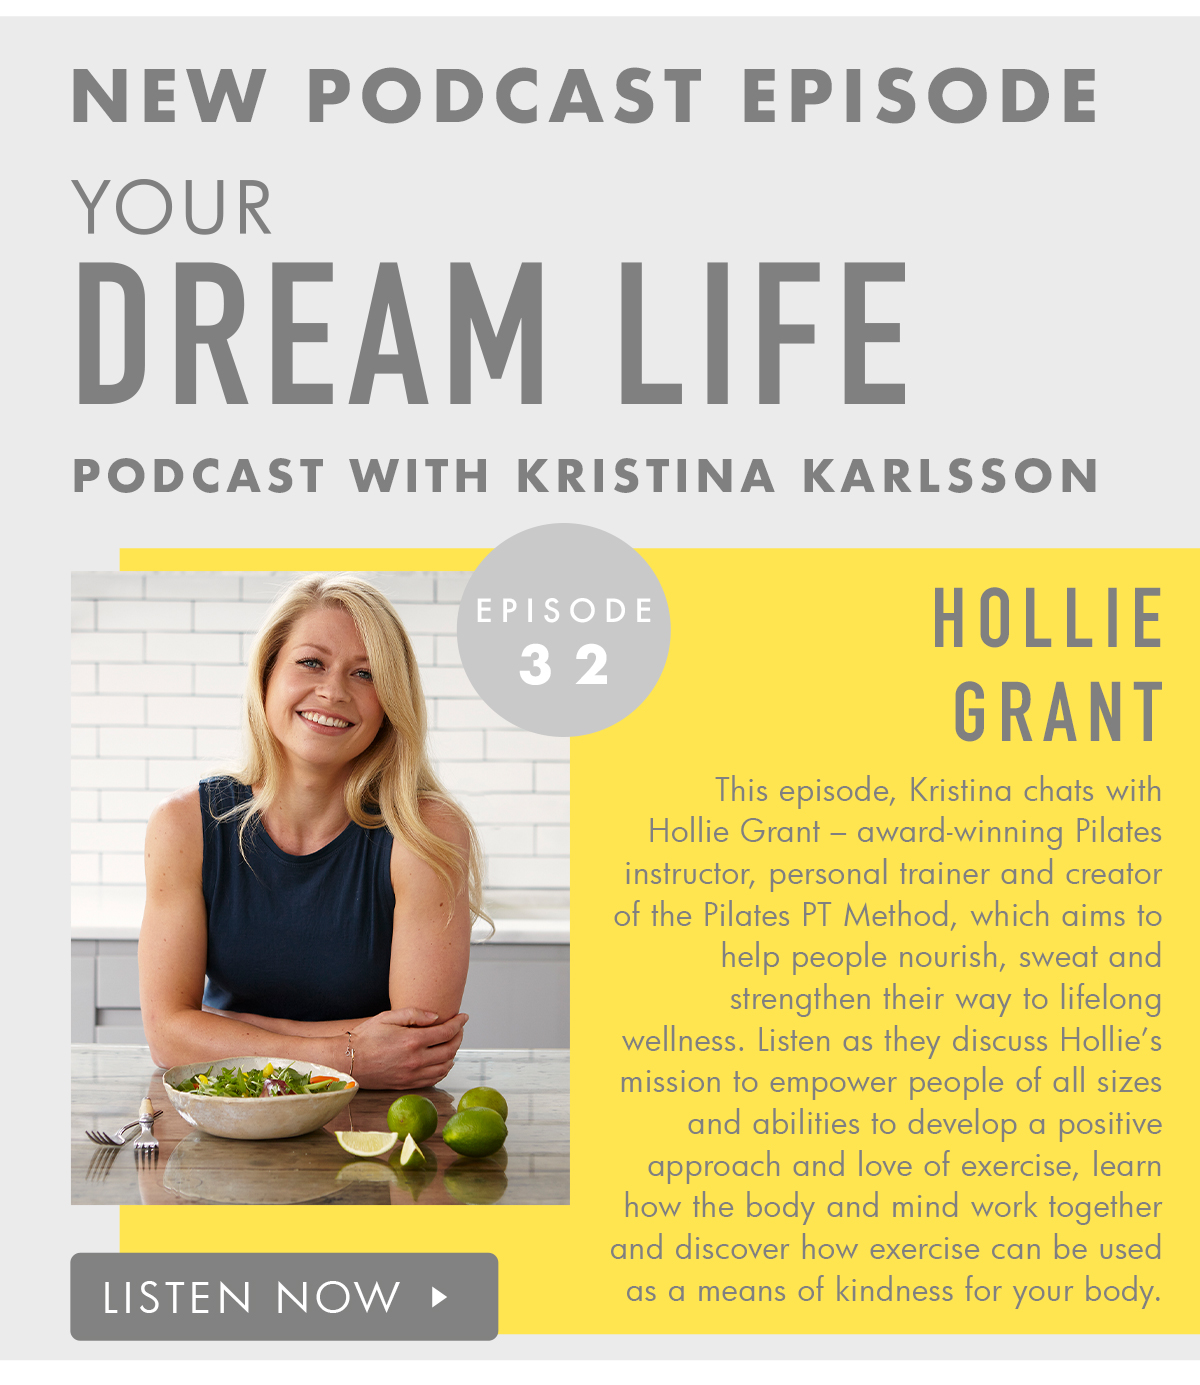 New Your Dream Life podcast episode. Listen now. 